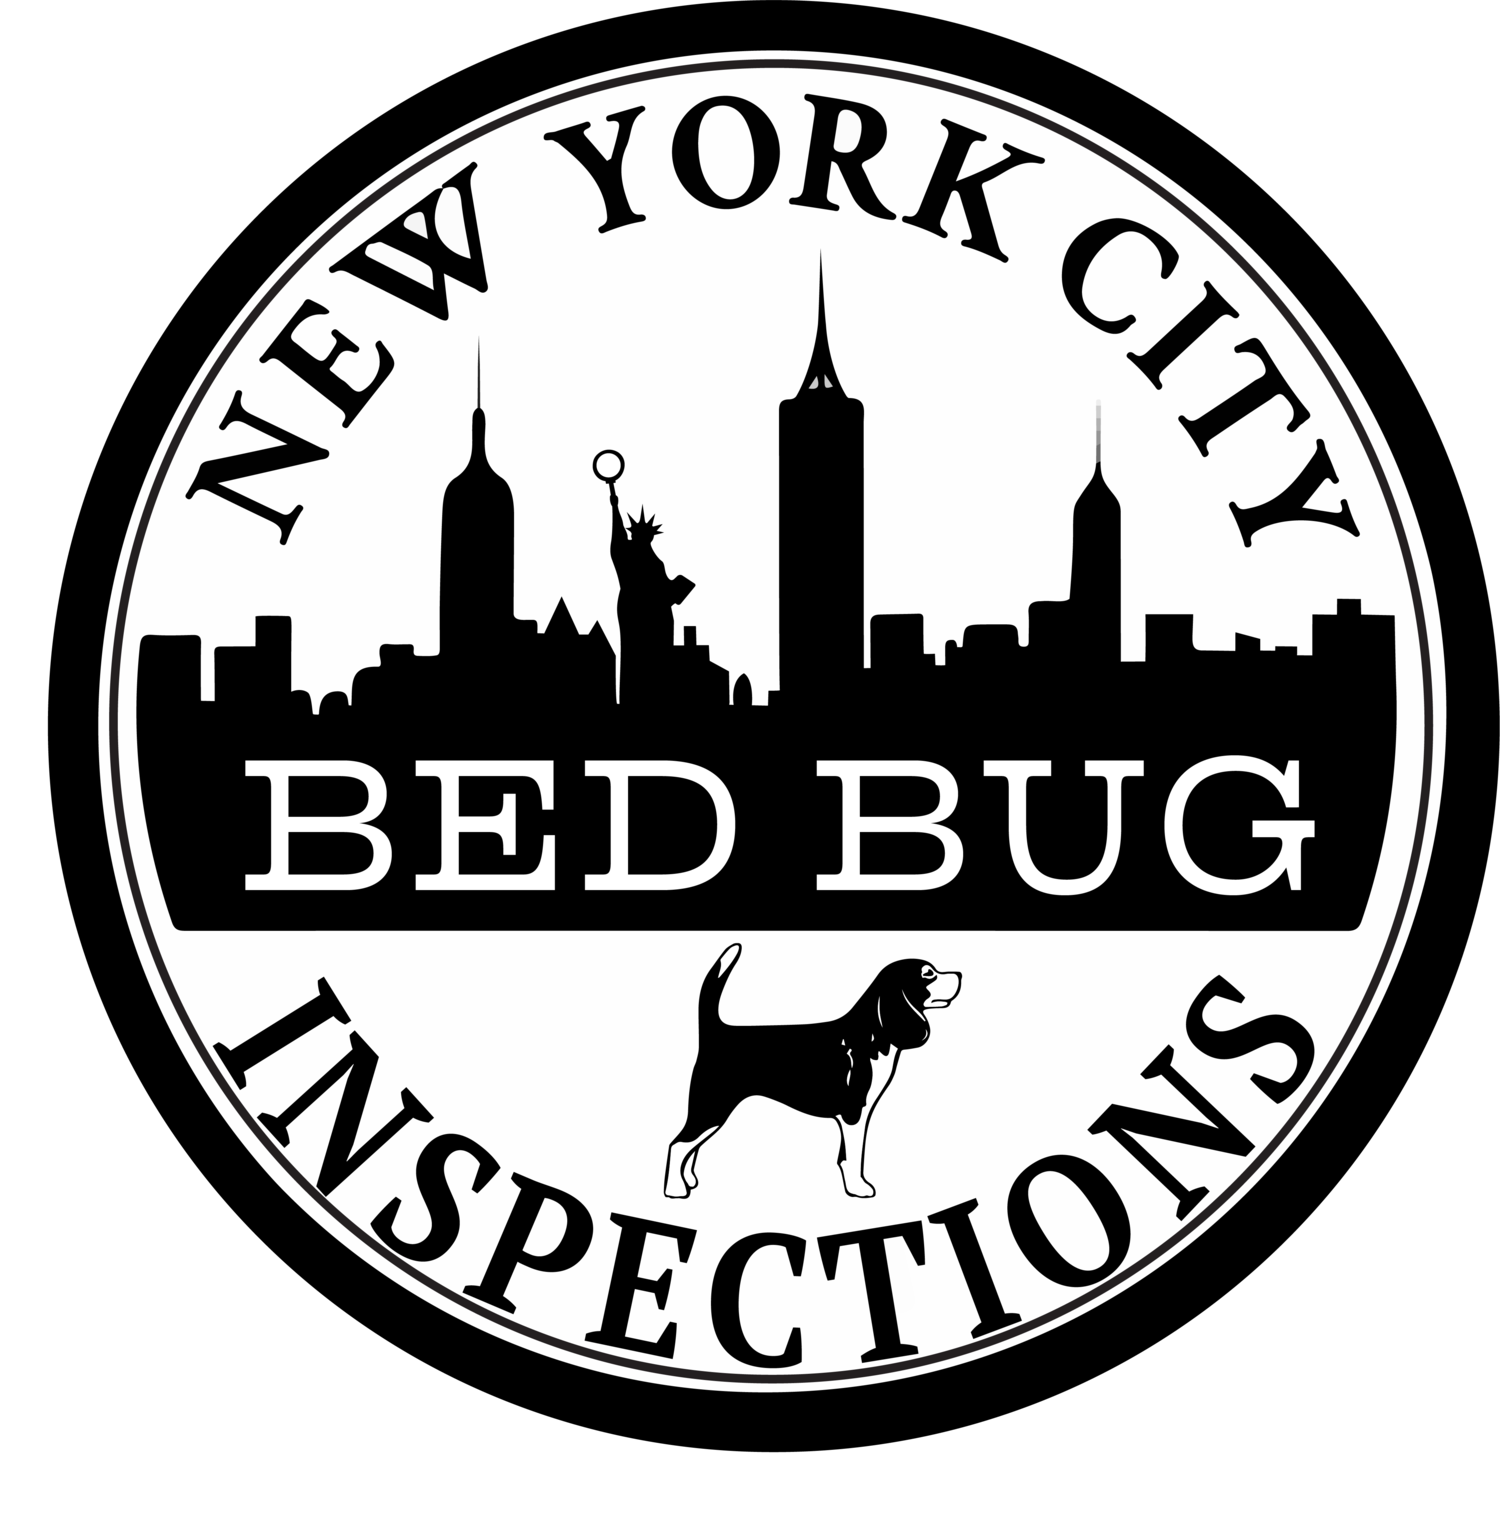 NYC BED BUG INSPECTIONS